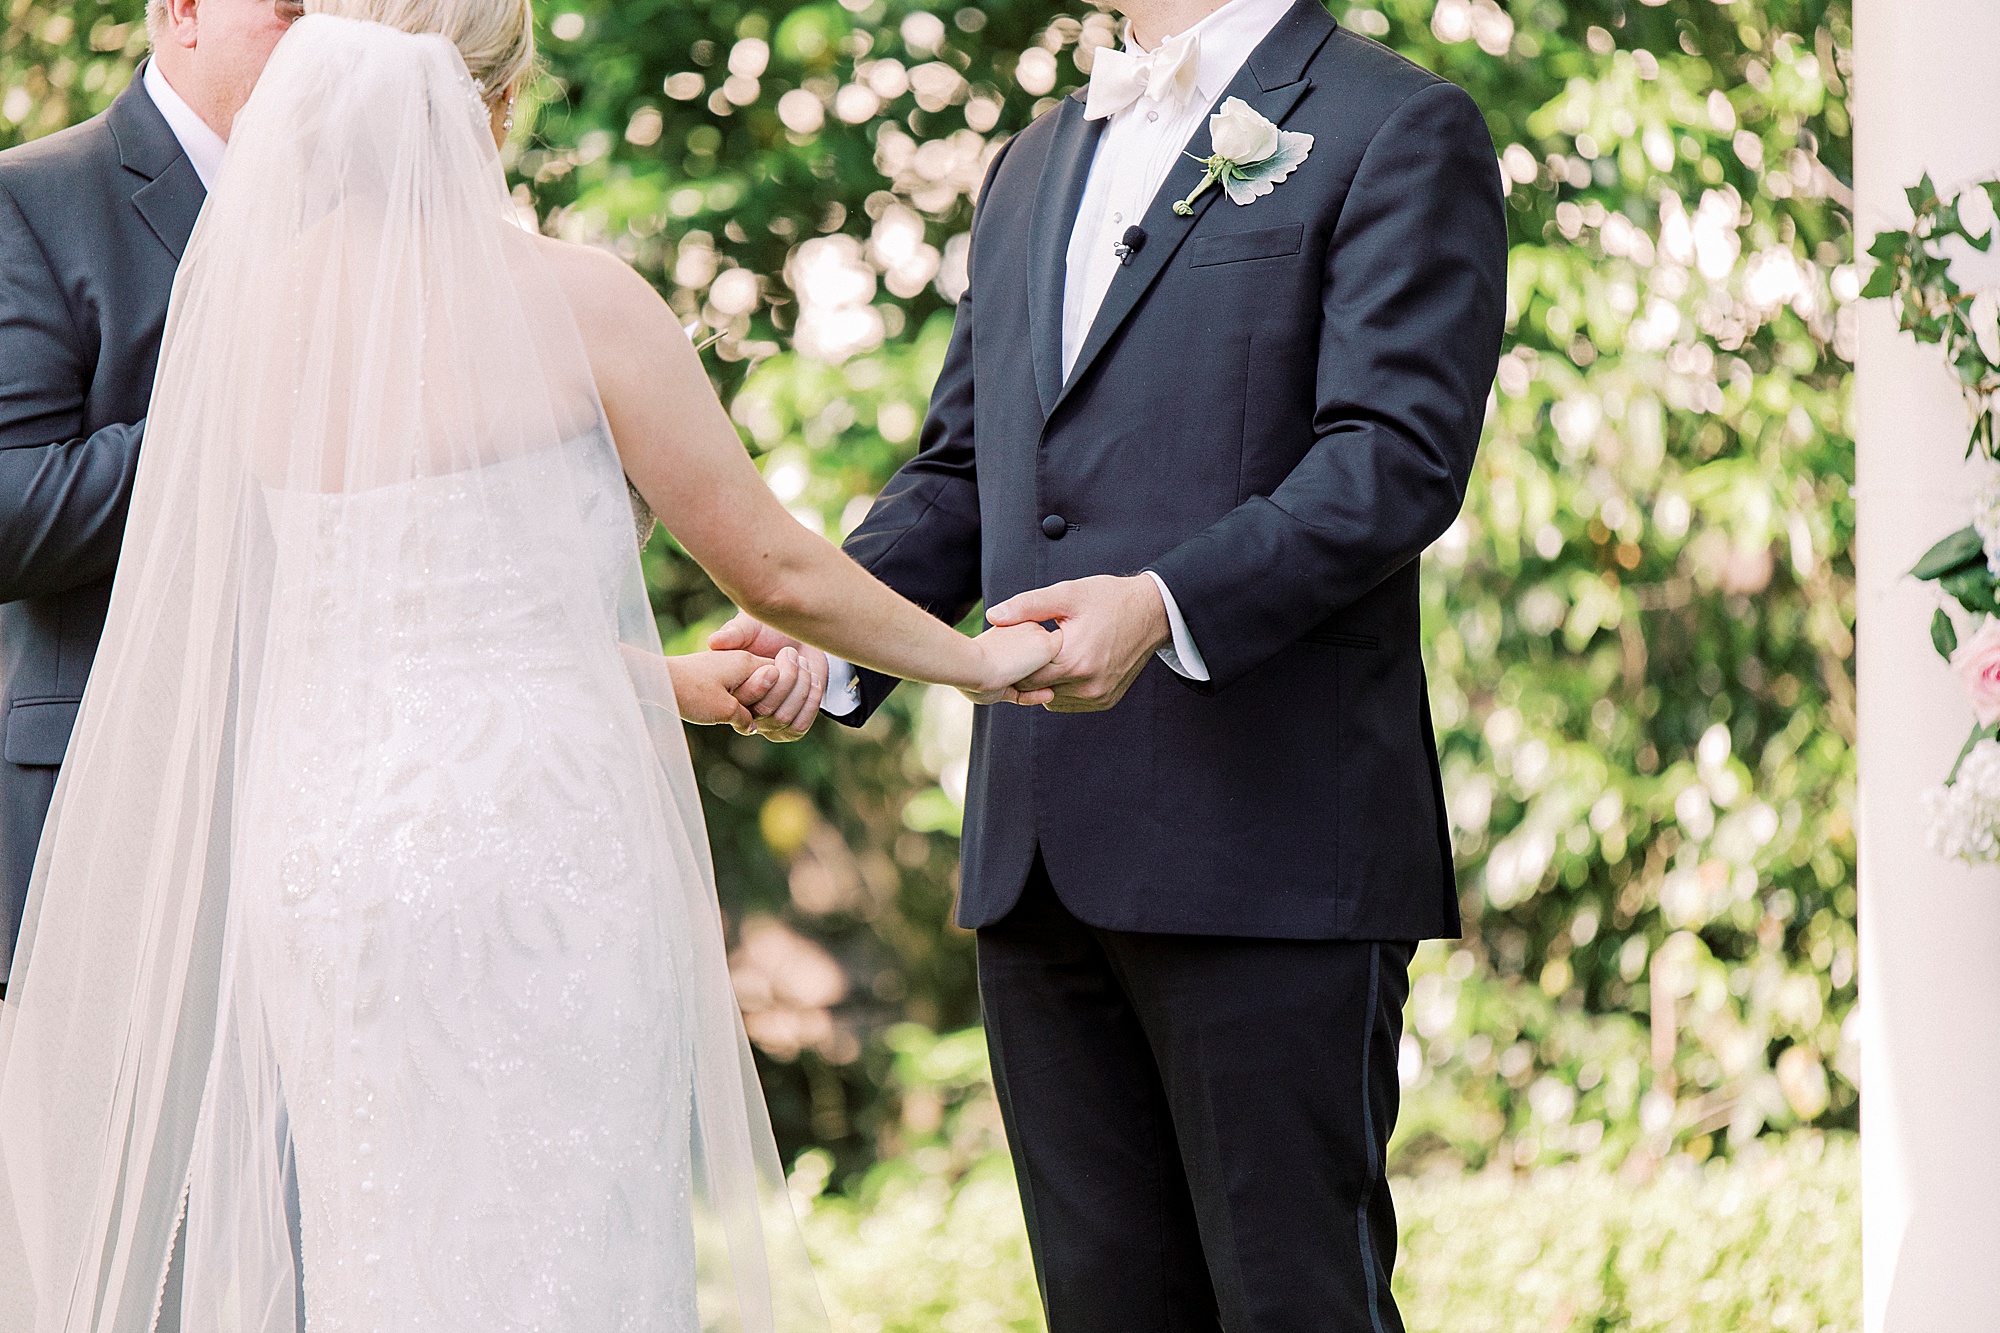 newlyweds hold hands during outdoor wedding ceremony at Separk Mansion